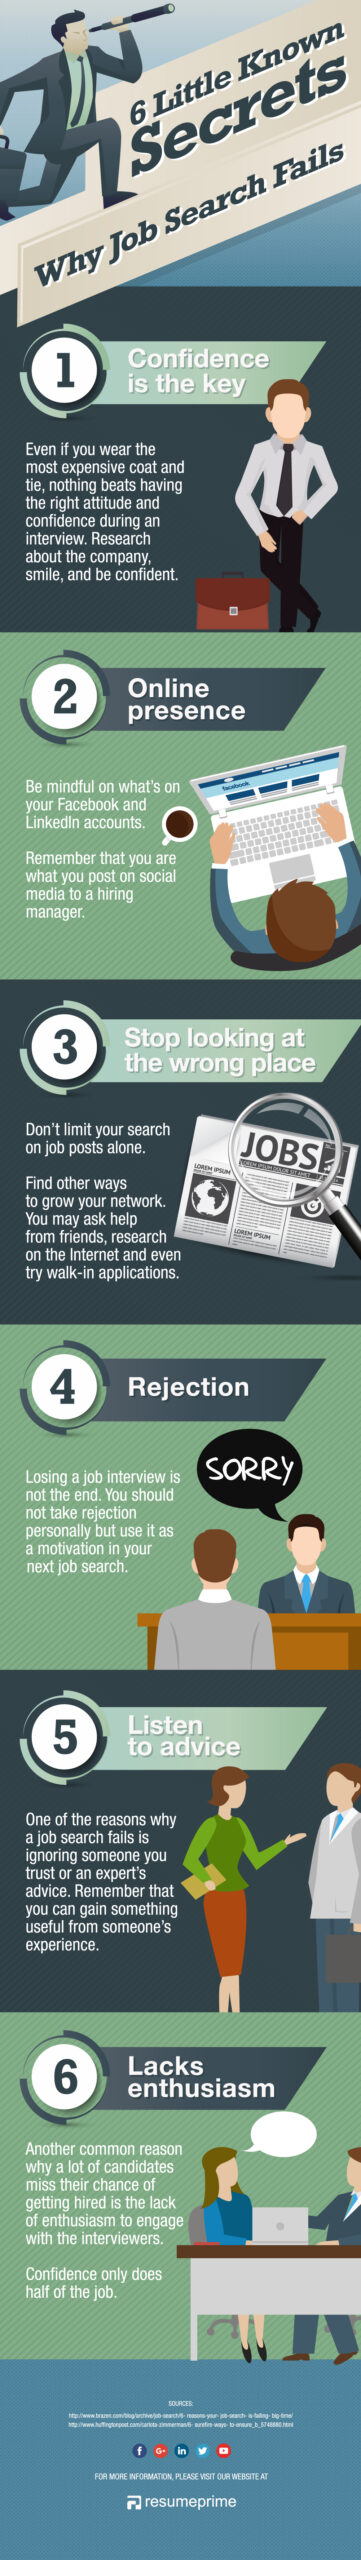 Job Search Fails: 6 Pitfalls to Watch Out For [Infographic]